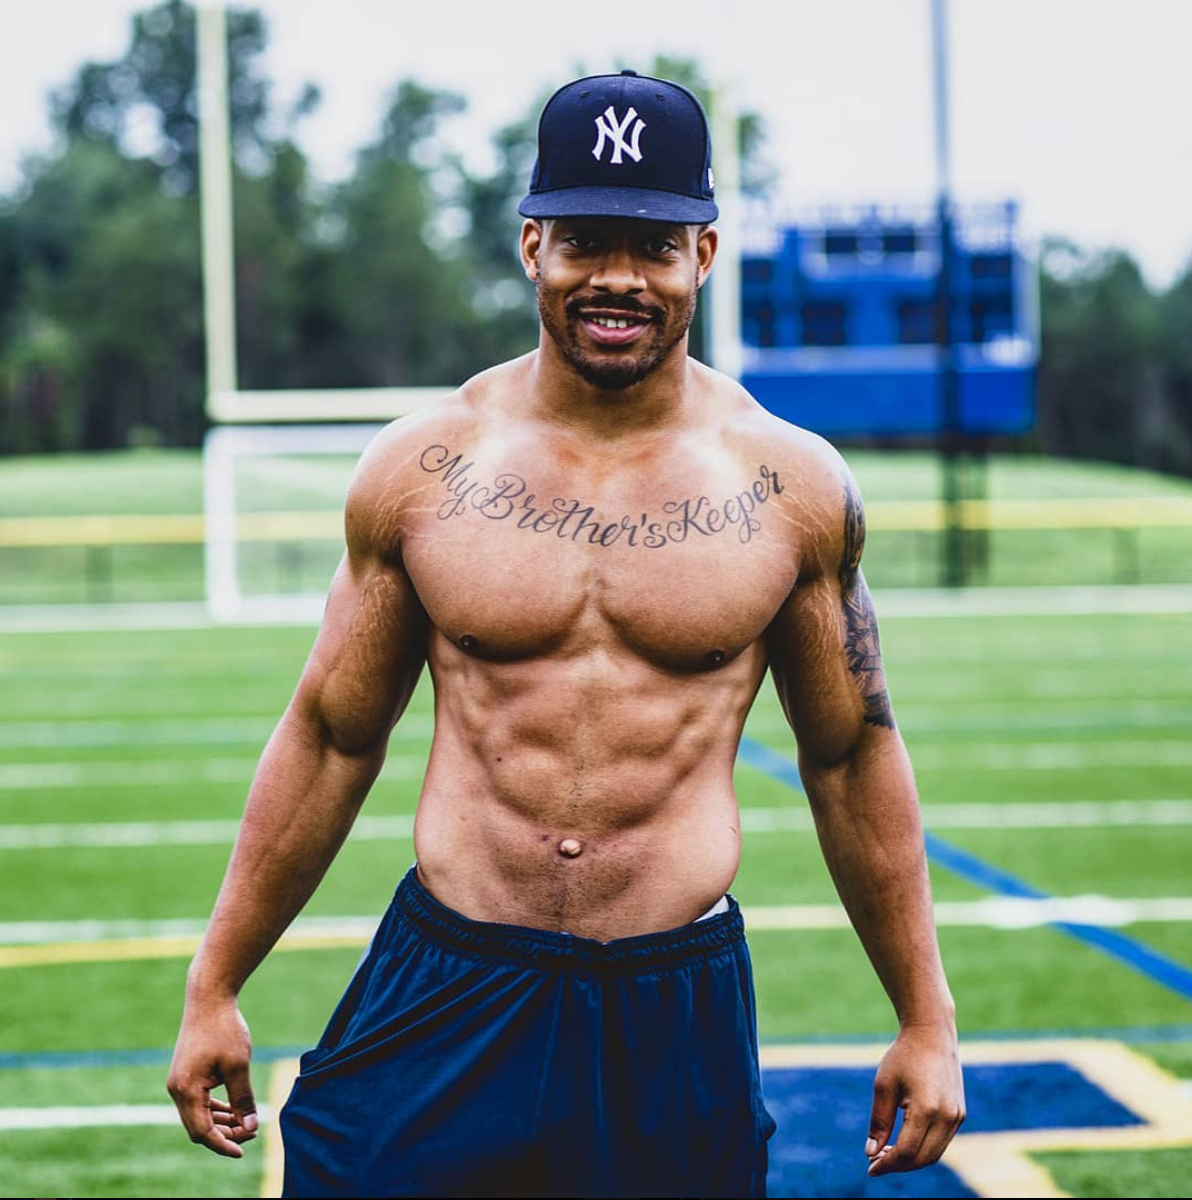 Eye Candy Alert! 7 Sexy Trainers Who Will Have You Wanting To Join Their Gym Today